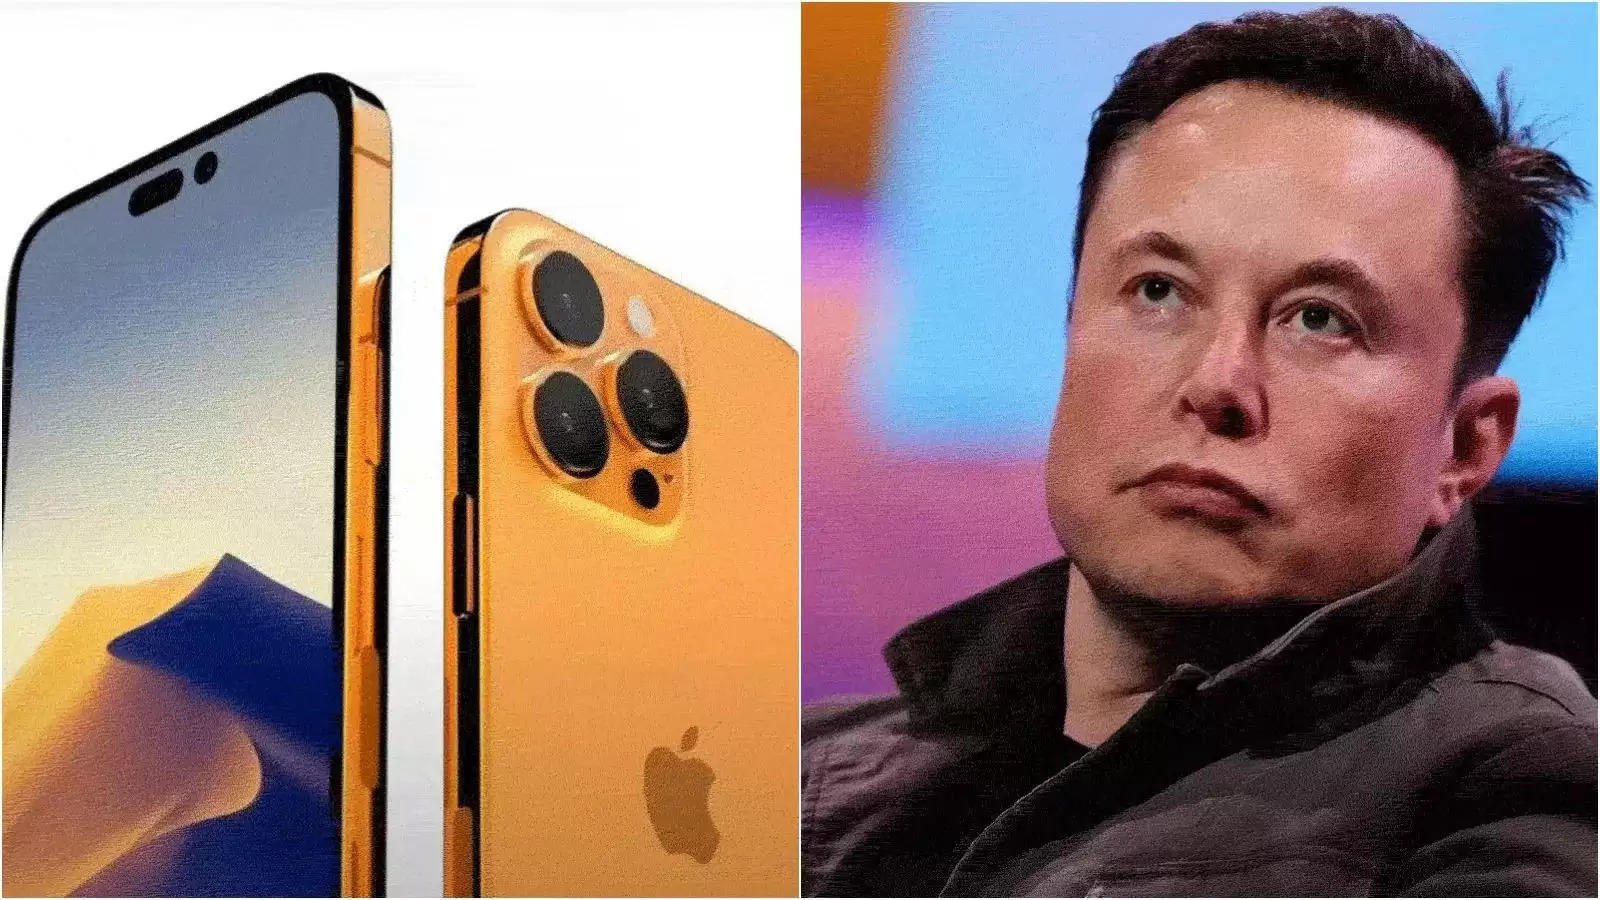 Elon Musk Threatens to Ban Apple Products Over ChatGPT Integration Concerns